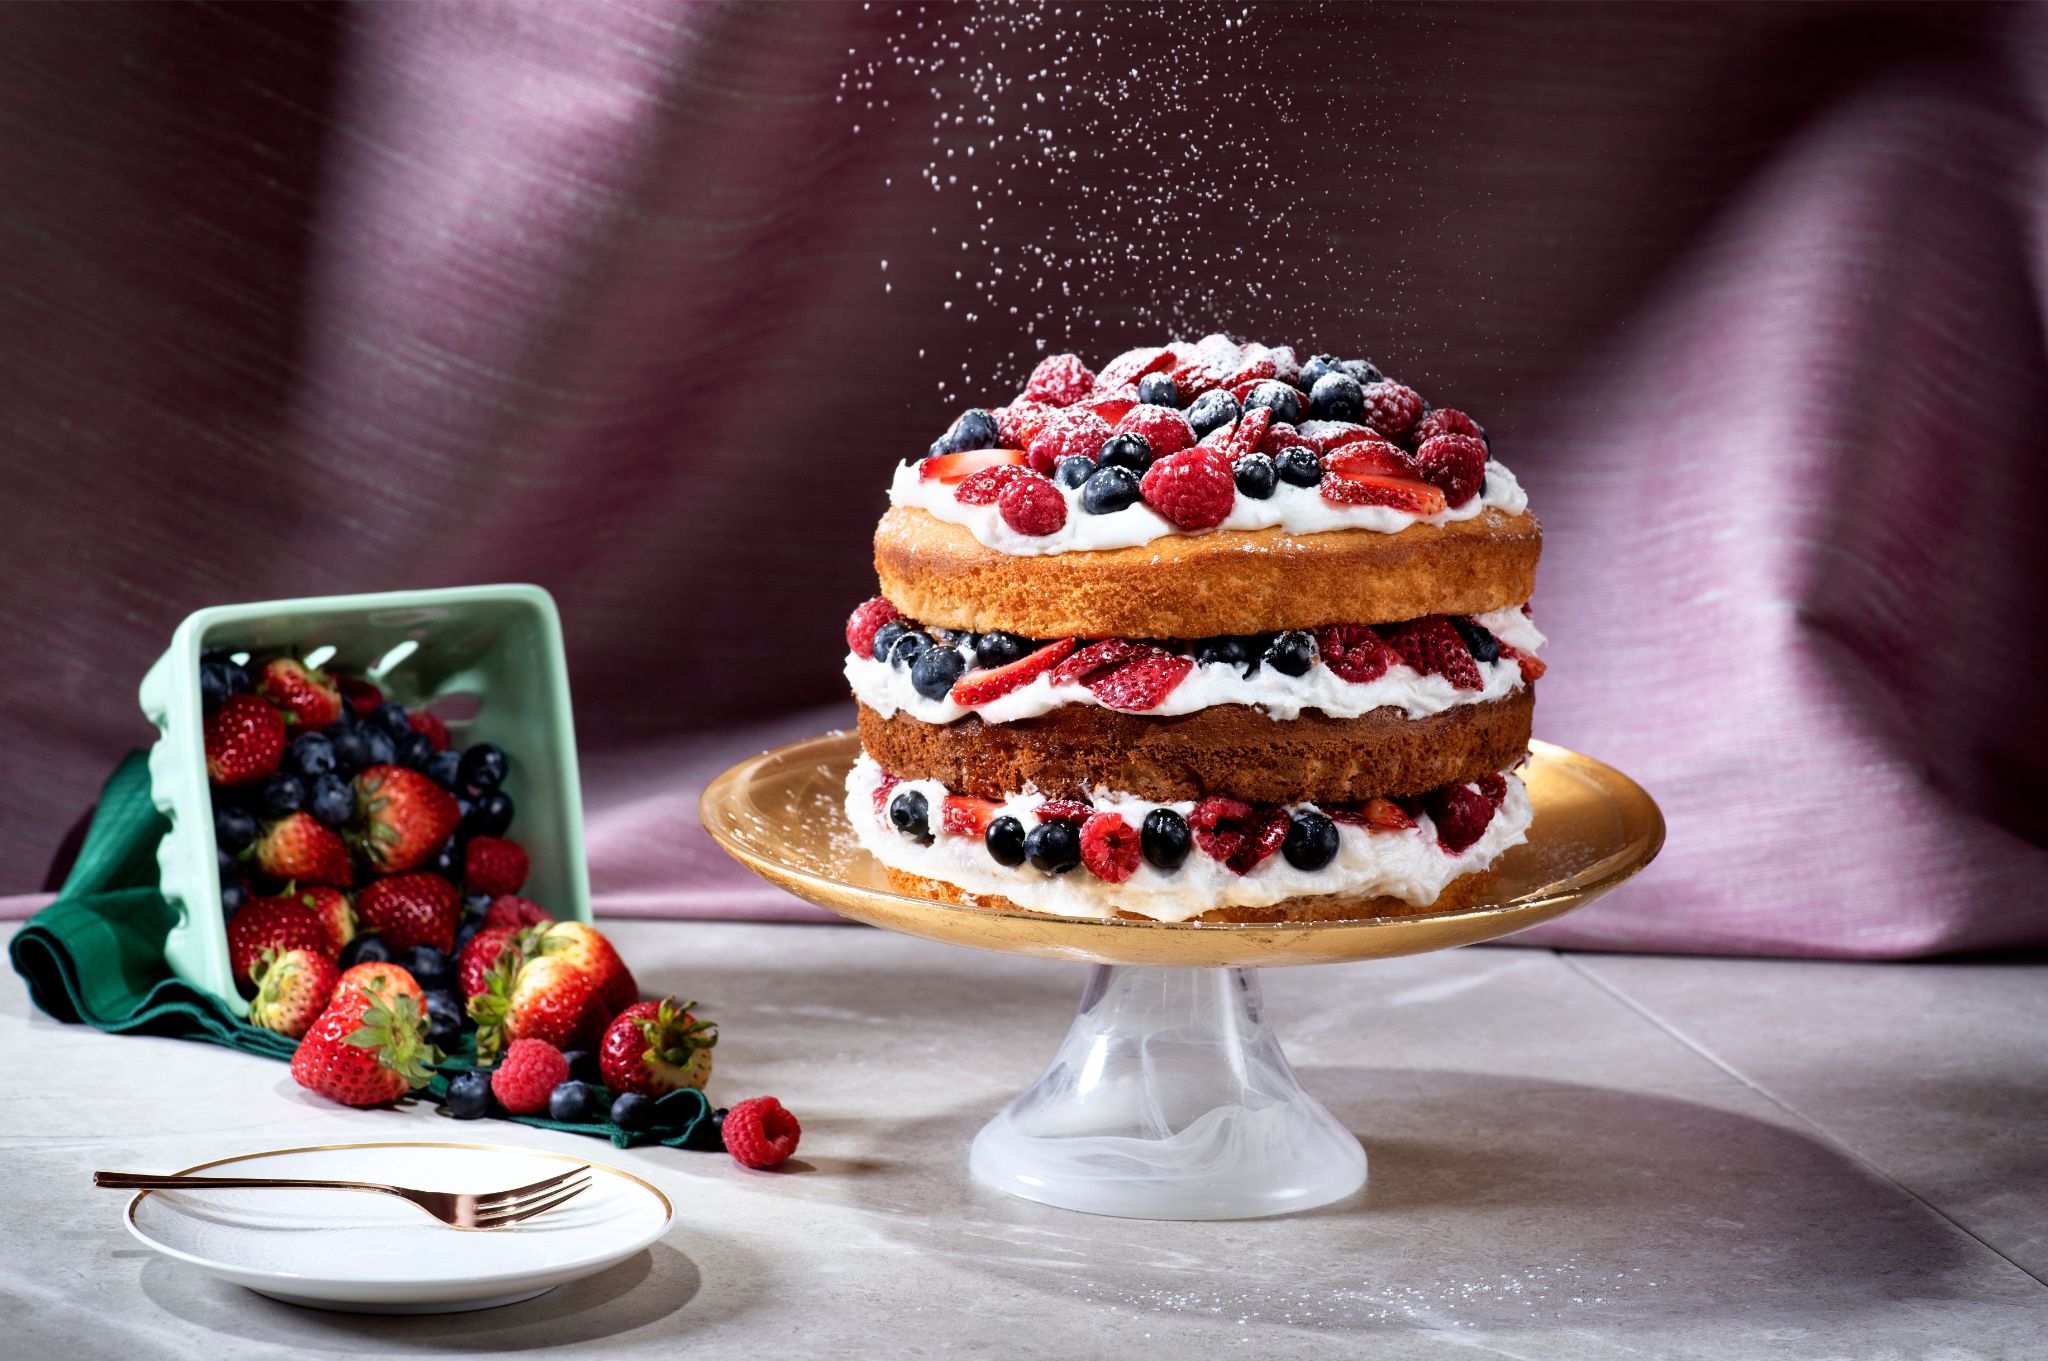 Caitlin Boyle photography of a dessert which includes a three layer cake topped with fresh berries.